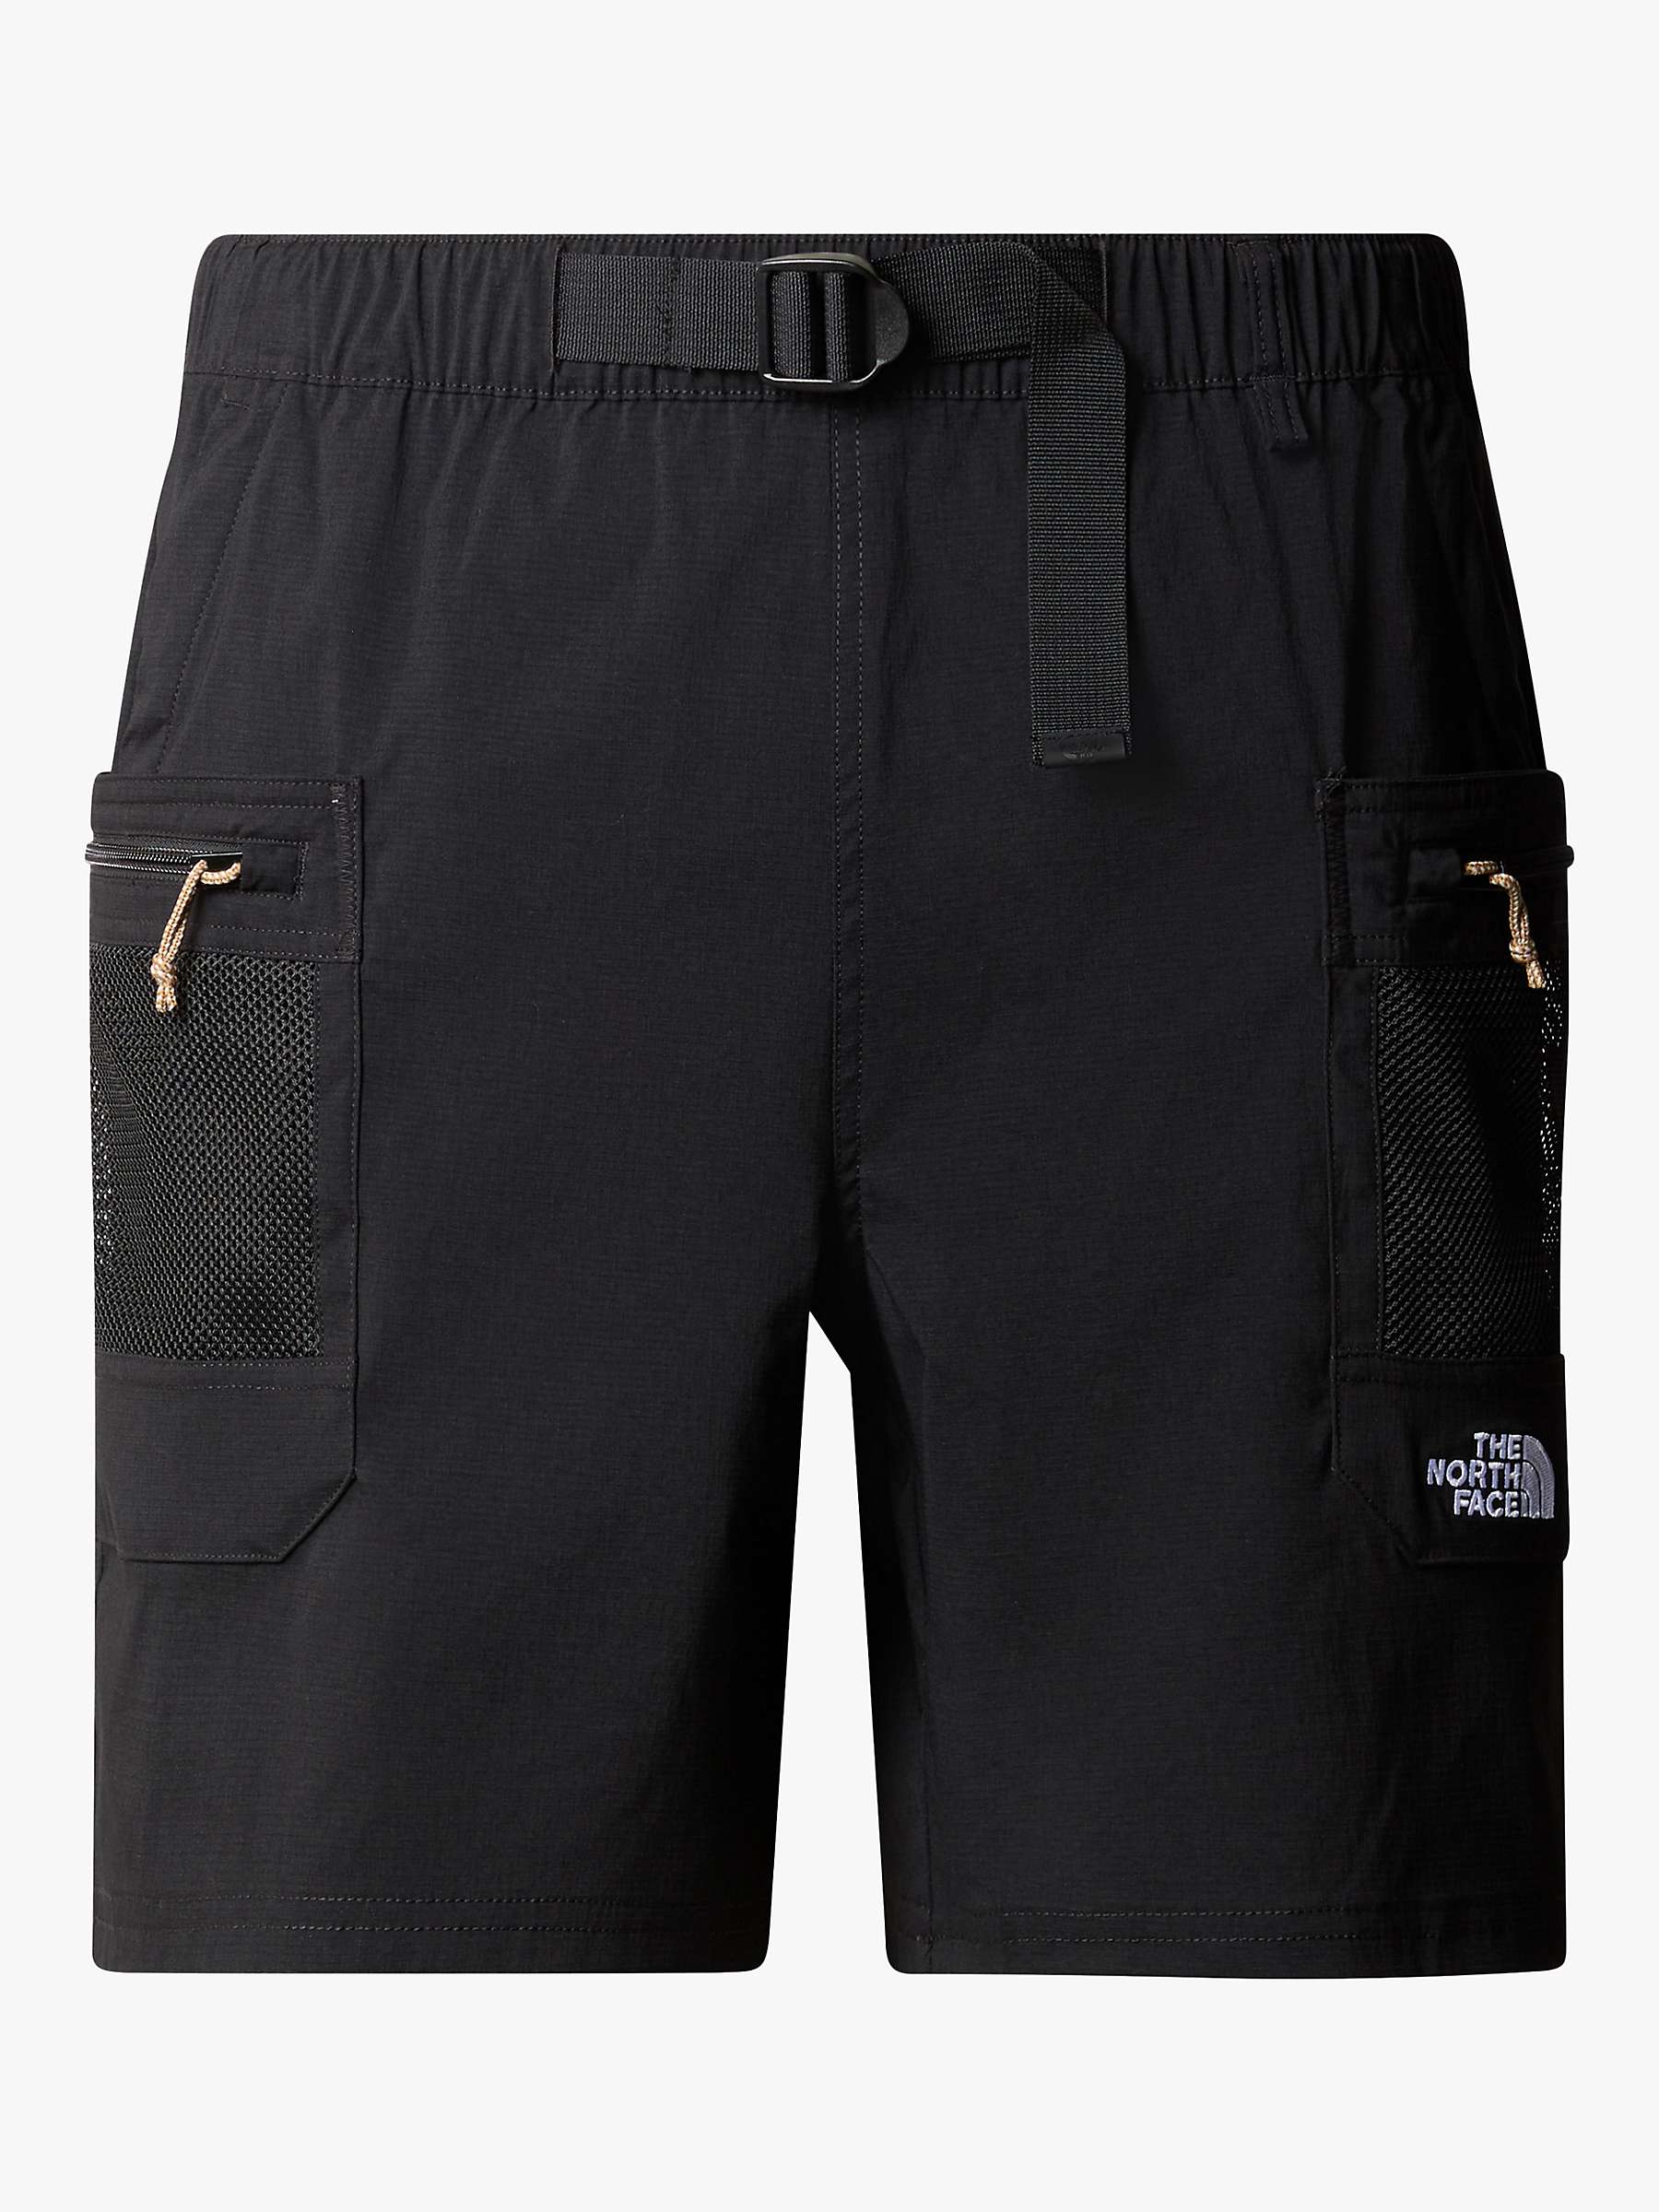 Buy The North Face Relaxed Fit Belted Shorts, Black Online at johnlewis.com